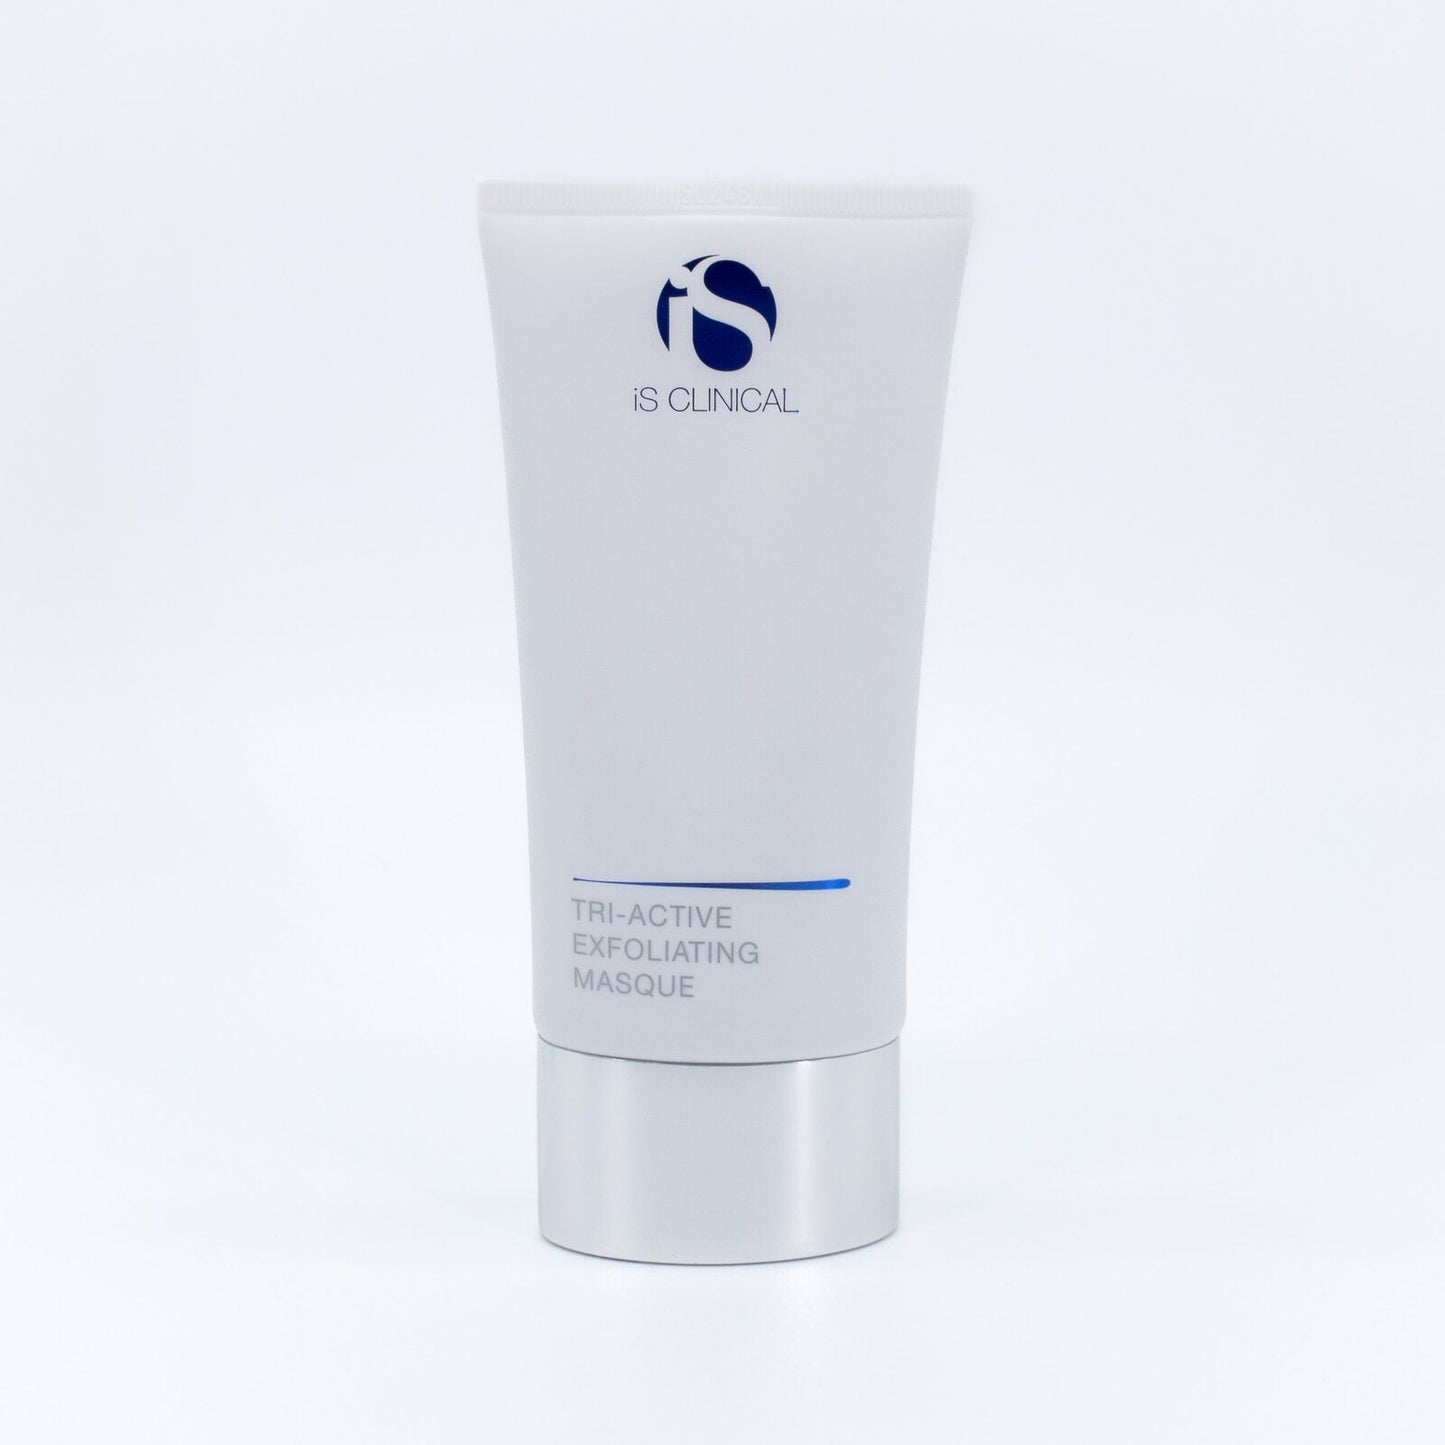 iS Clinical Tri-Active Exfoliating Masque 4oz - Small Amount Missing